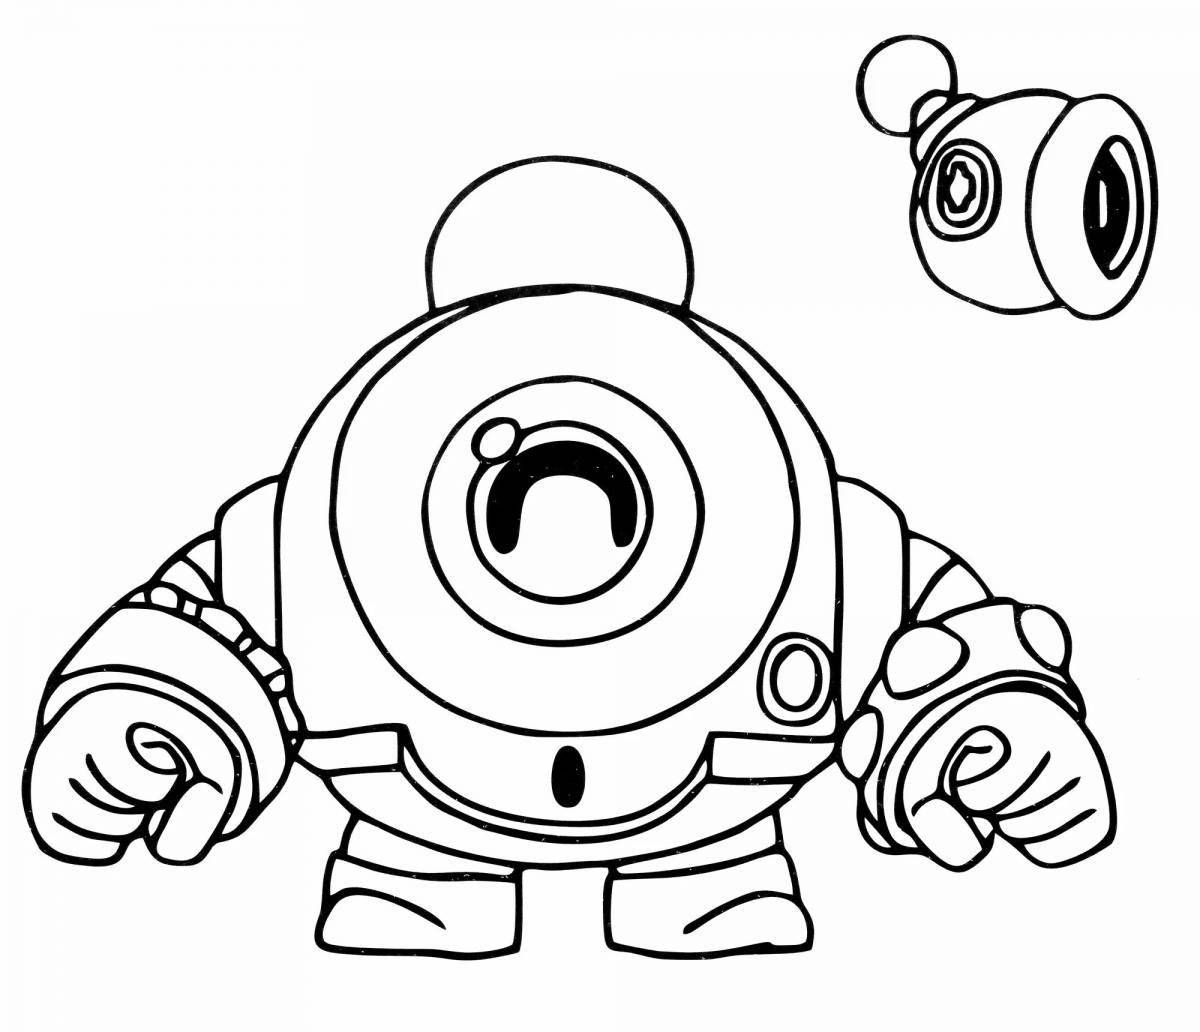 Brawl stars bold coloring pages